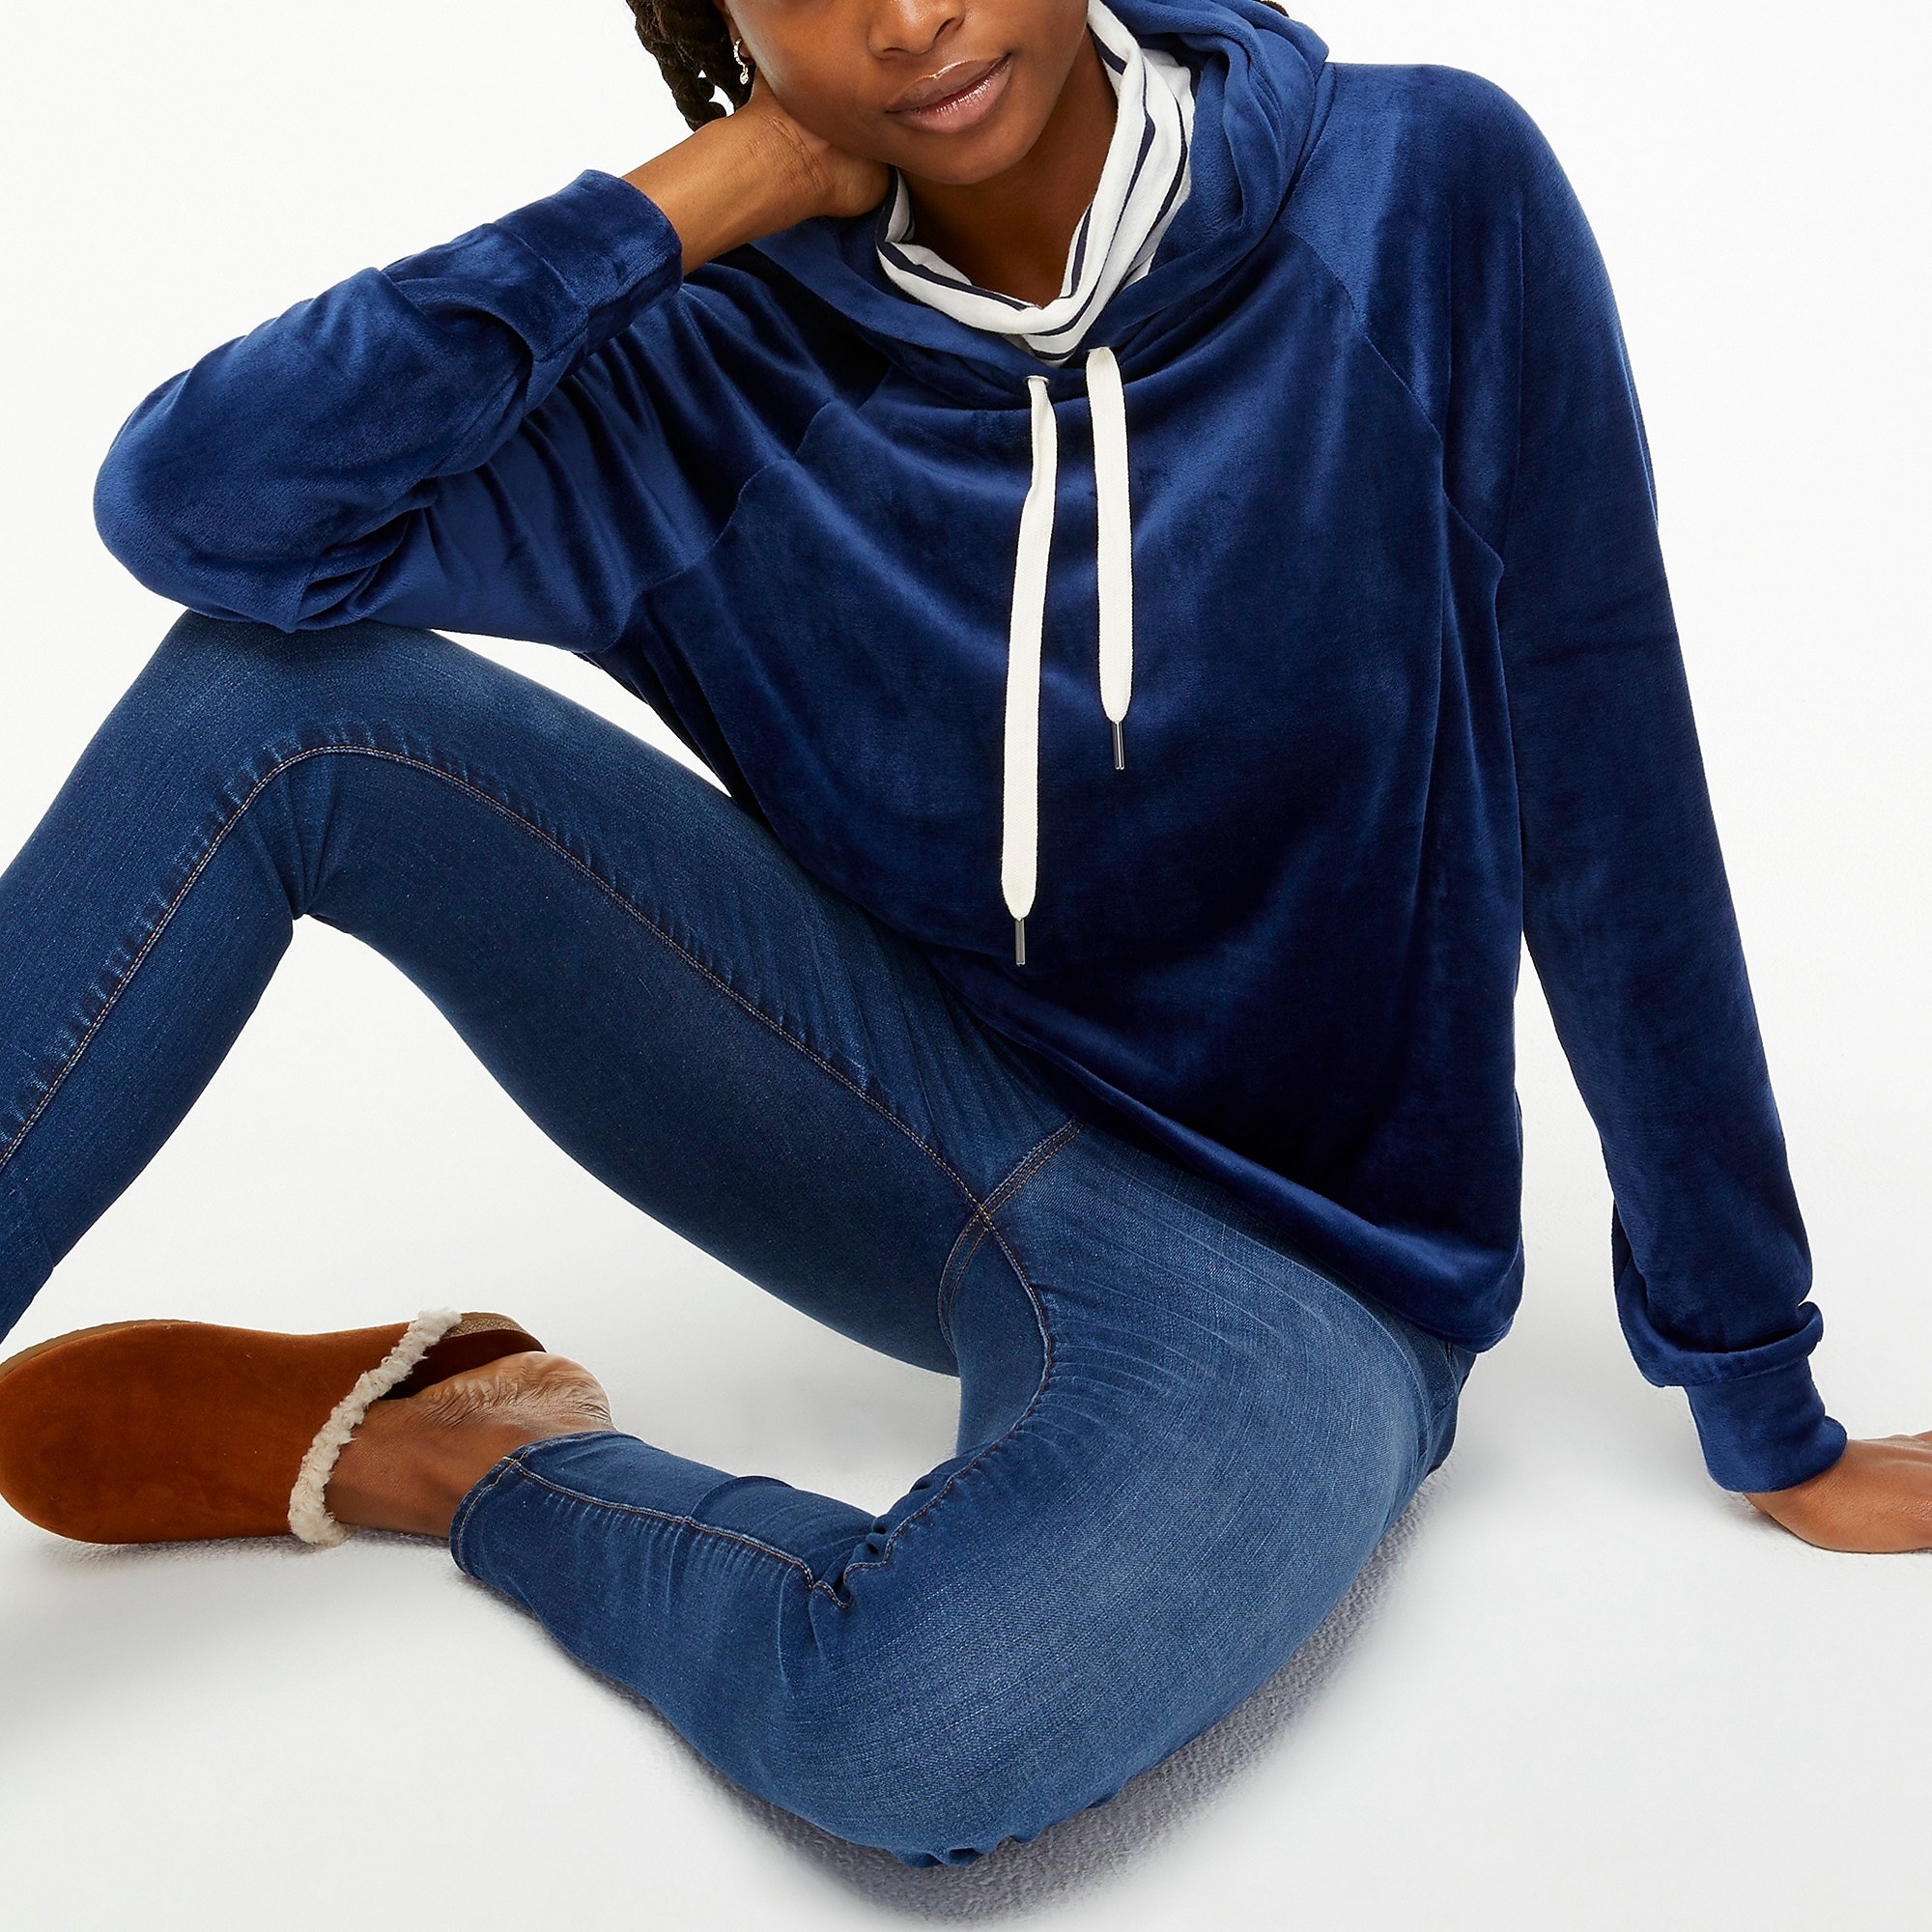 Model wearing blue velour sweater with jeans and brown fuzzy slippers